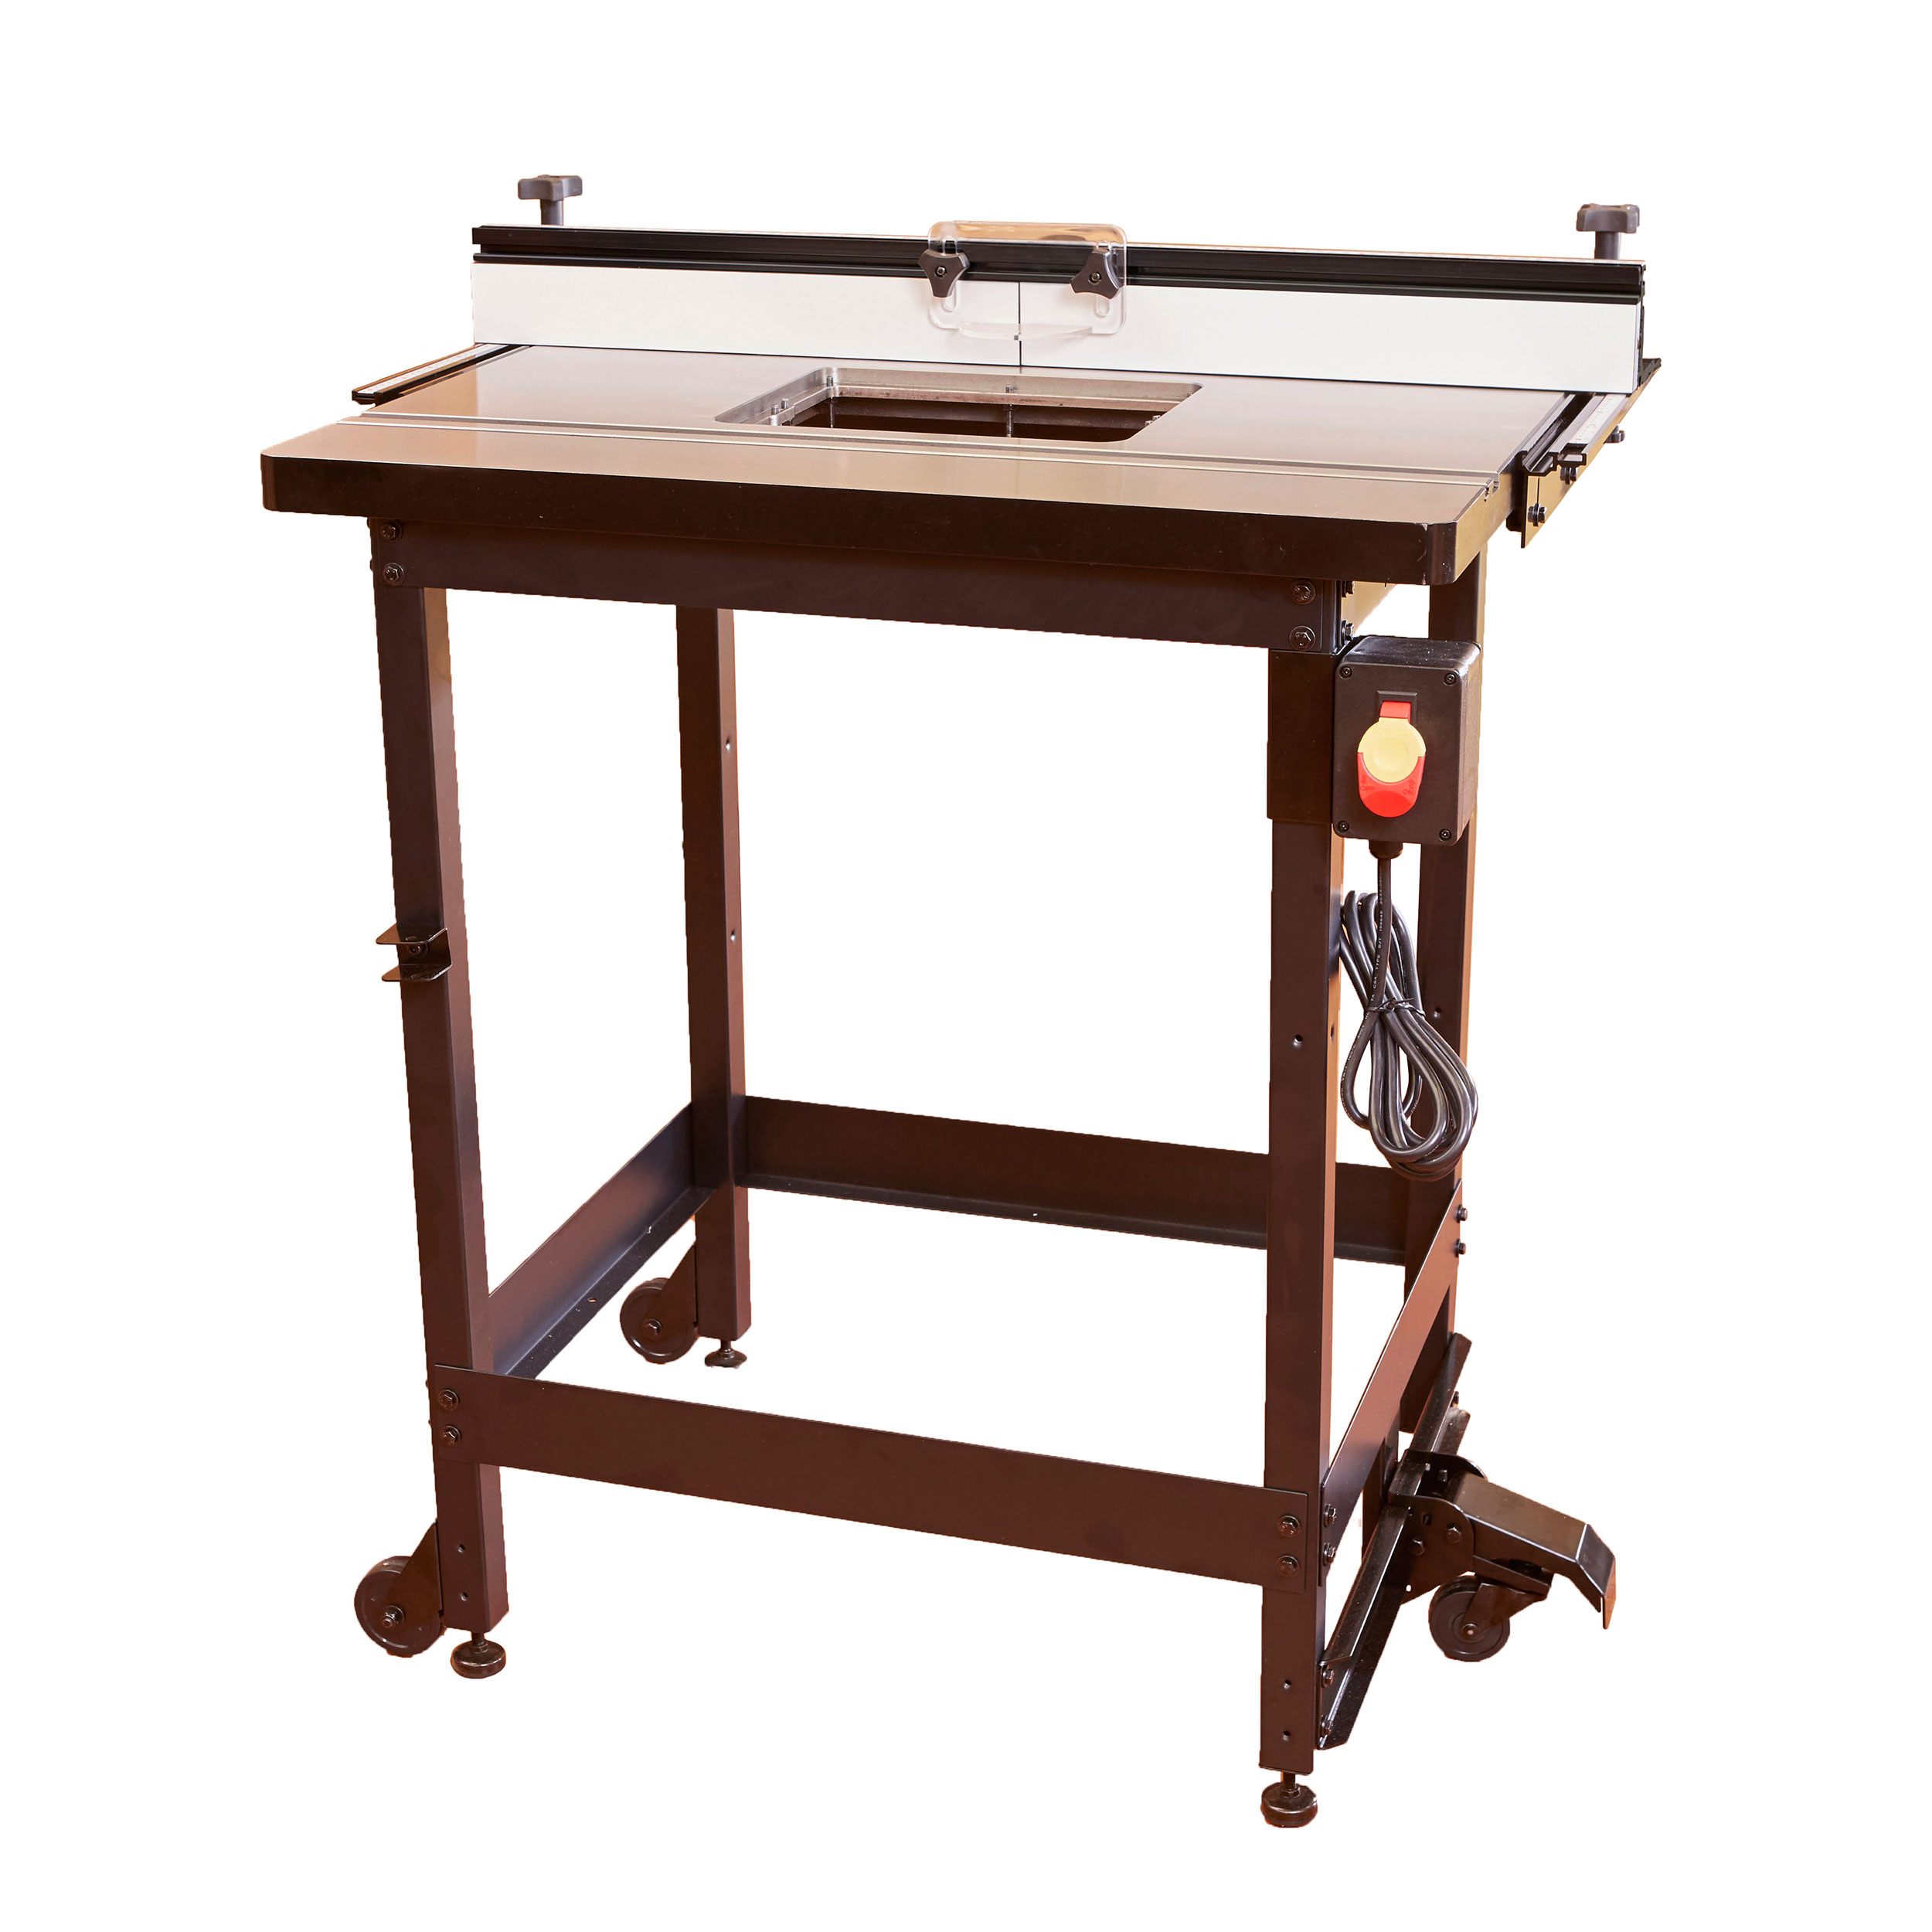 Cast Iron Top Router Table Kit